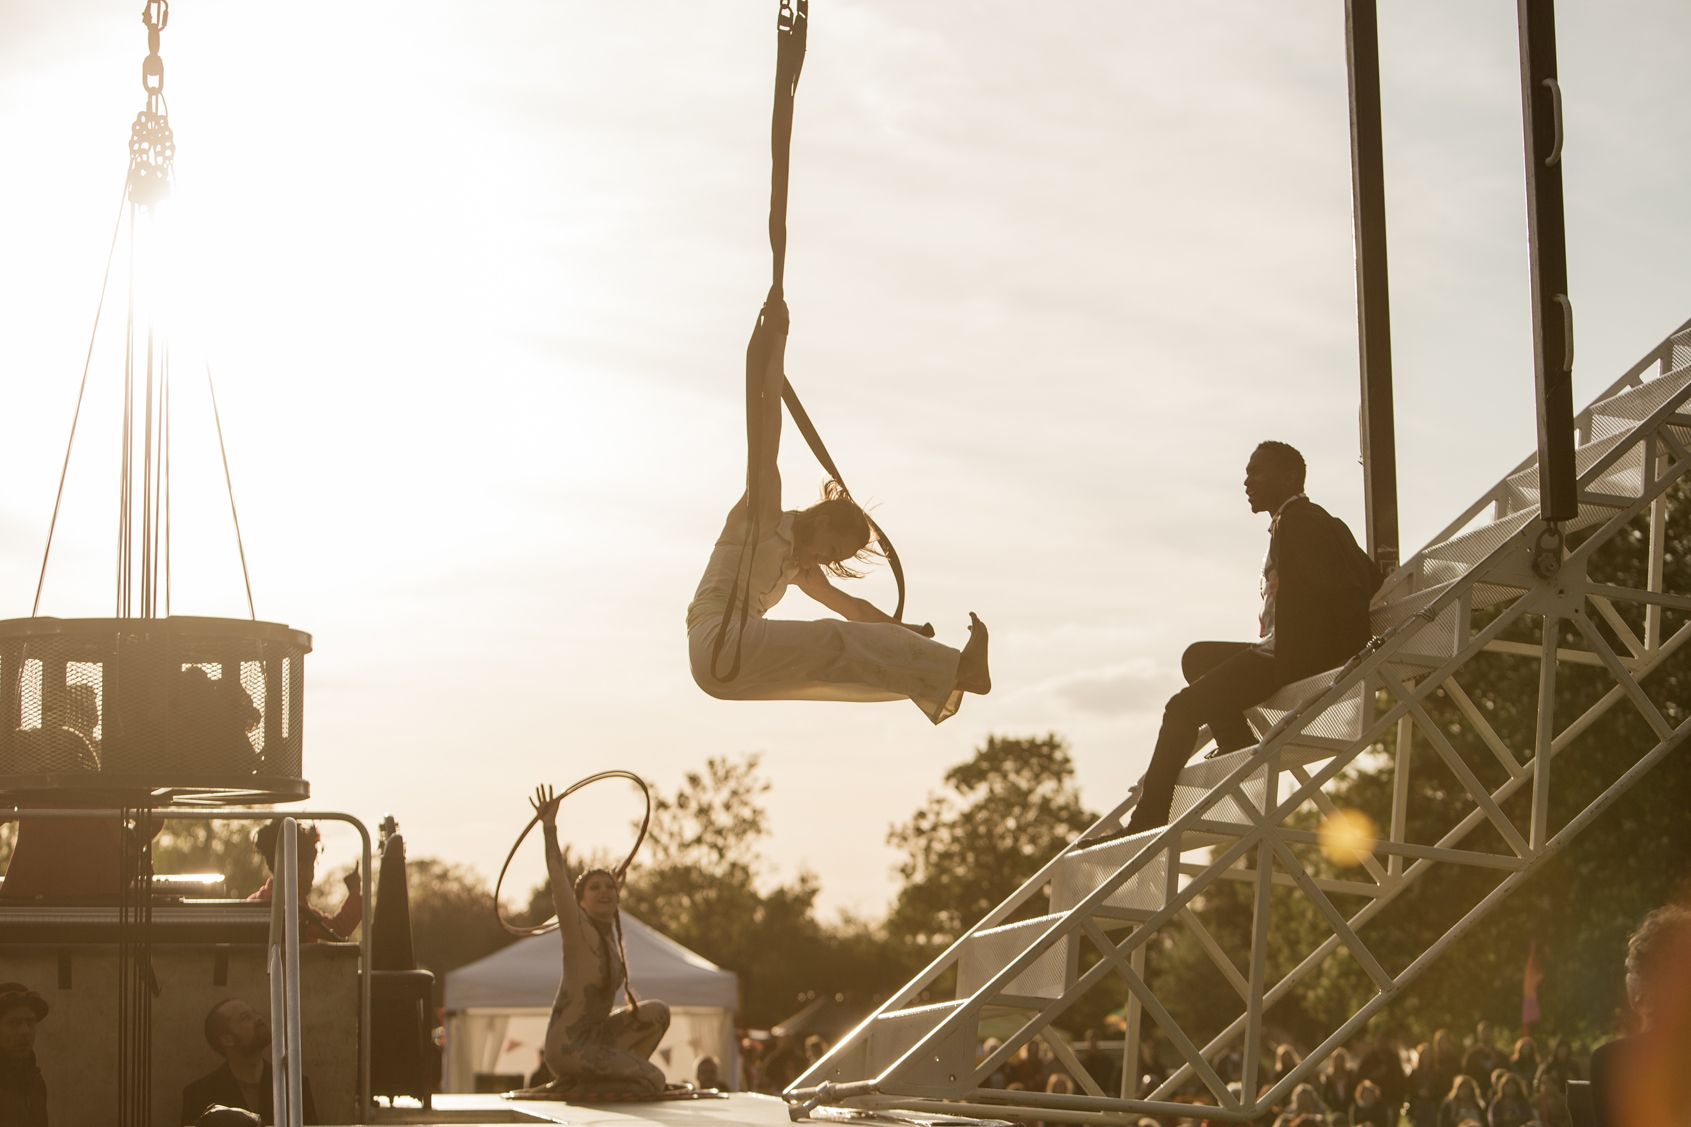 Aislinn swings on aerial straps above the Weighting show set. Behind her Nelly holds a hoop in the air and David sits on the staircase. They are all in silhouette as the sun lies low in the sky.